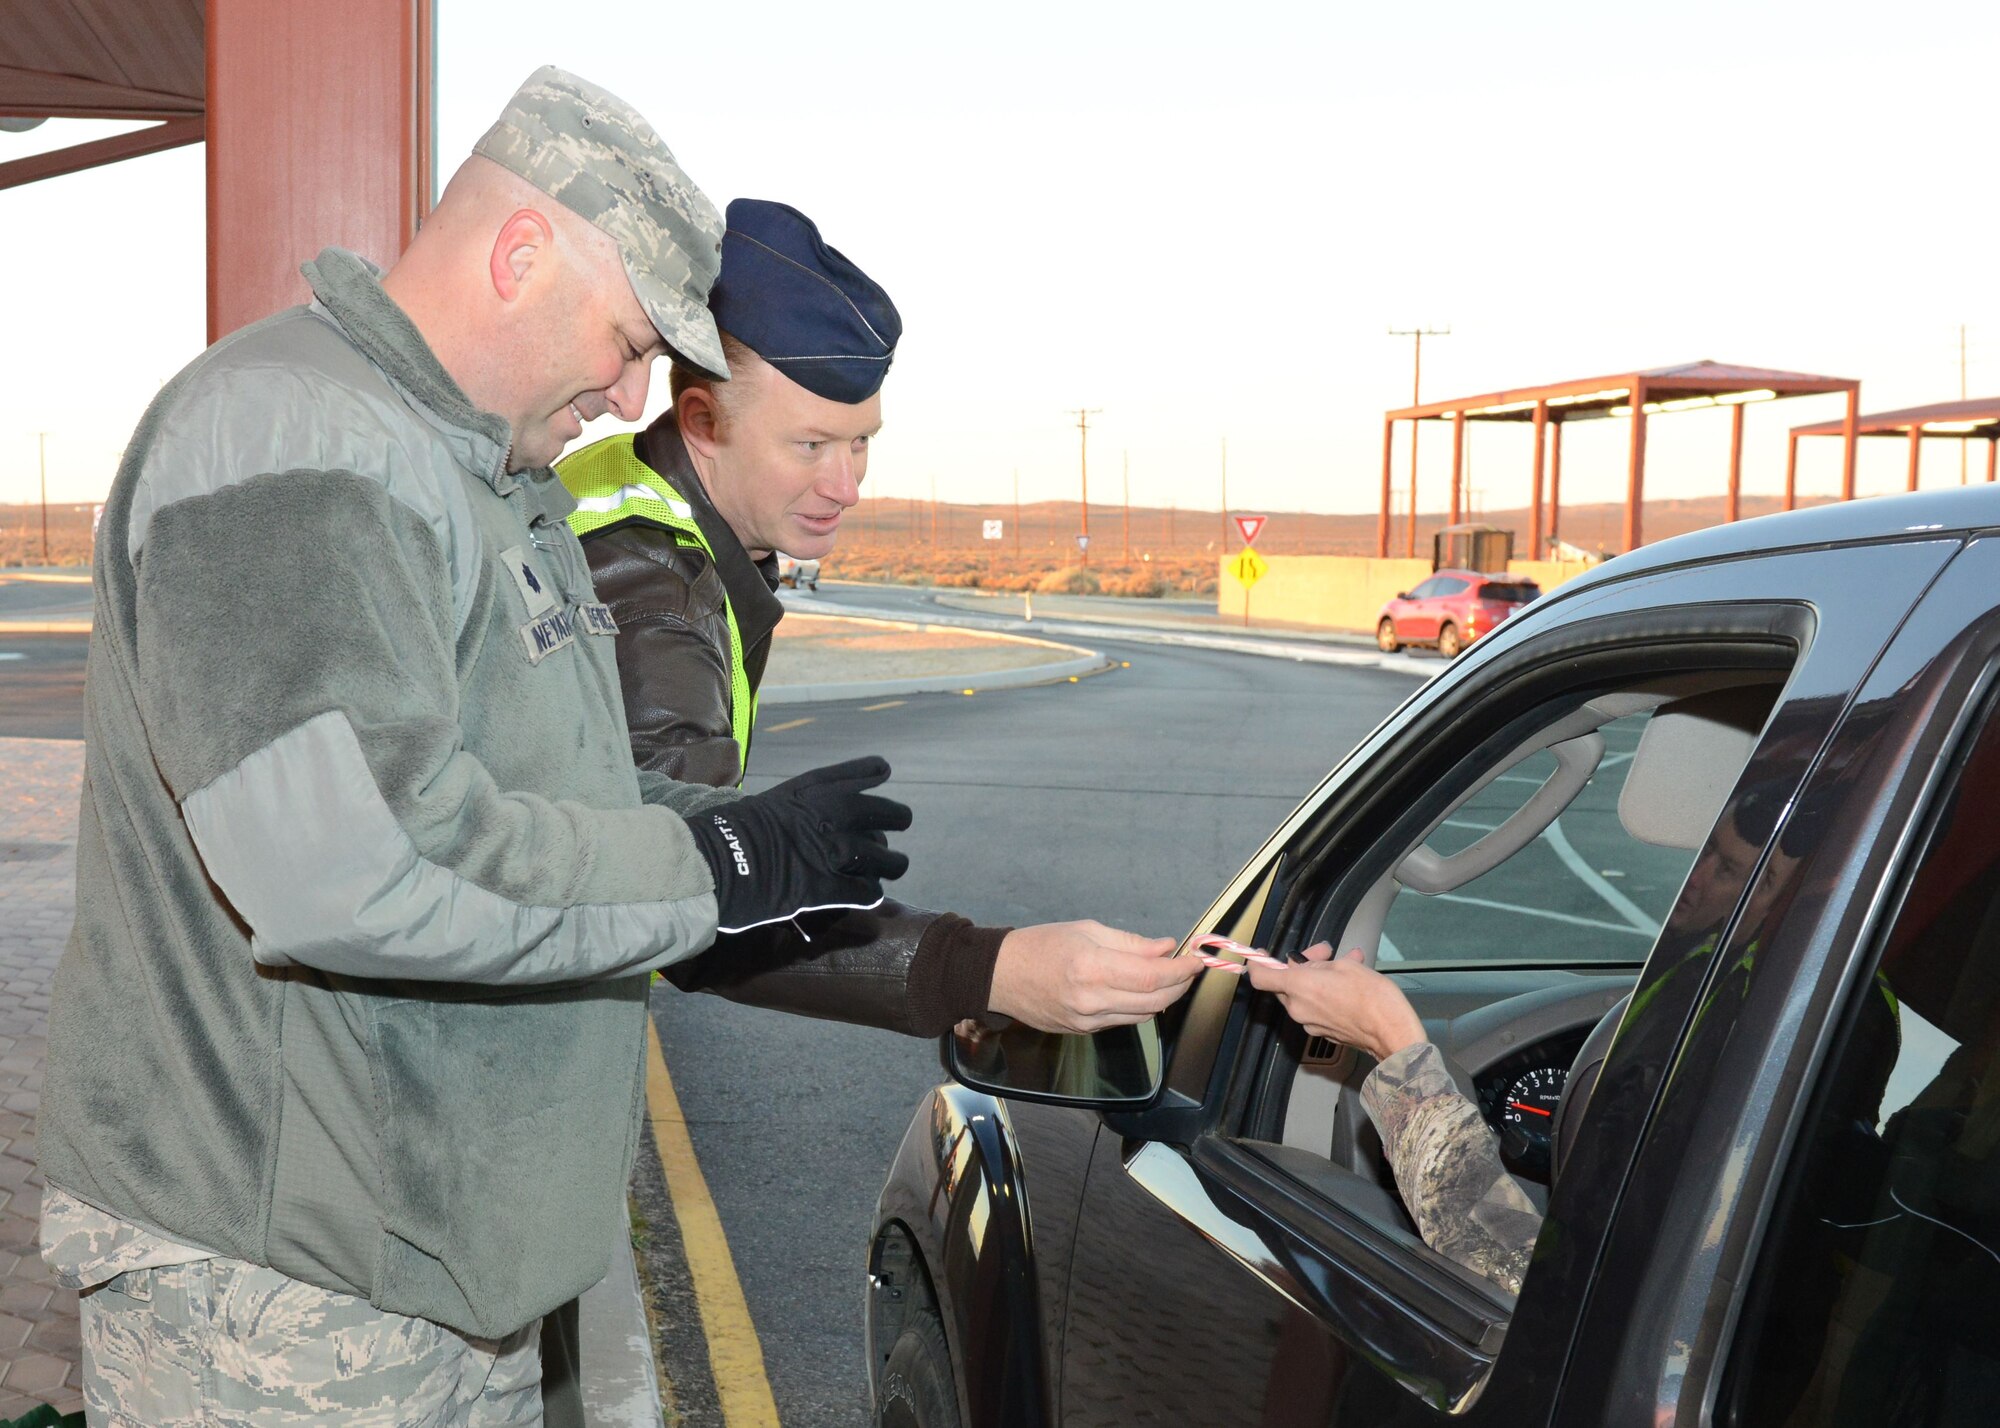 Lt. Col. Grant Vineyard, 412th Mission Support Group (left), and Lt. Col. Cory Naddy, 412th Test Wing Safety Office, greet motorists at the North Gate Dec. 18. A yearly tradition, base leadership and supervisors hand out candy canes and holiday cards at all of Edwards AFB’s entry gates to show their appreciation to the Edwards workforce and wish everyone a safe holiday season. (U.S. Air Force photo by Kenji Thuloweit)